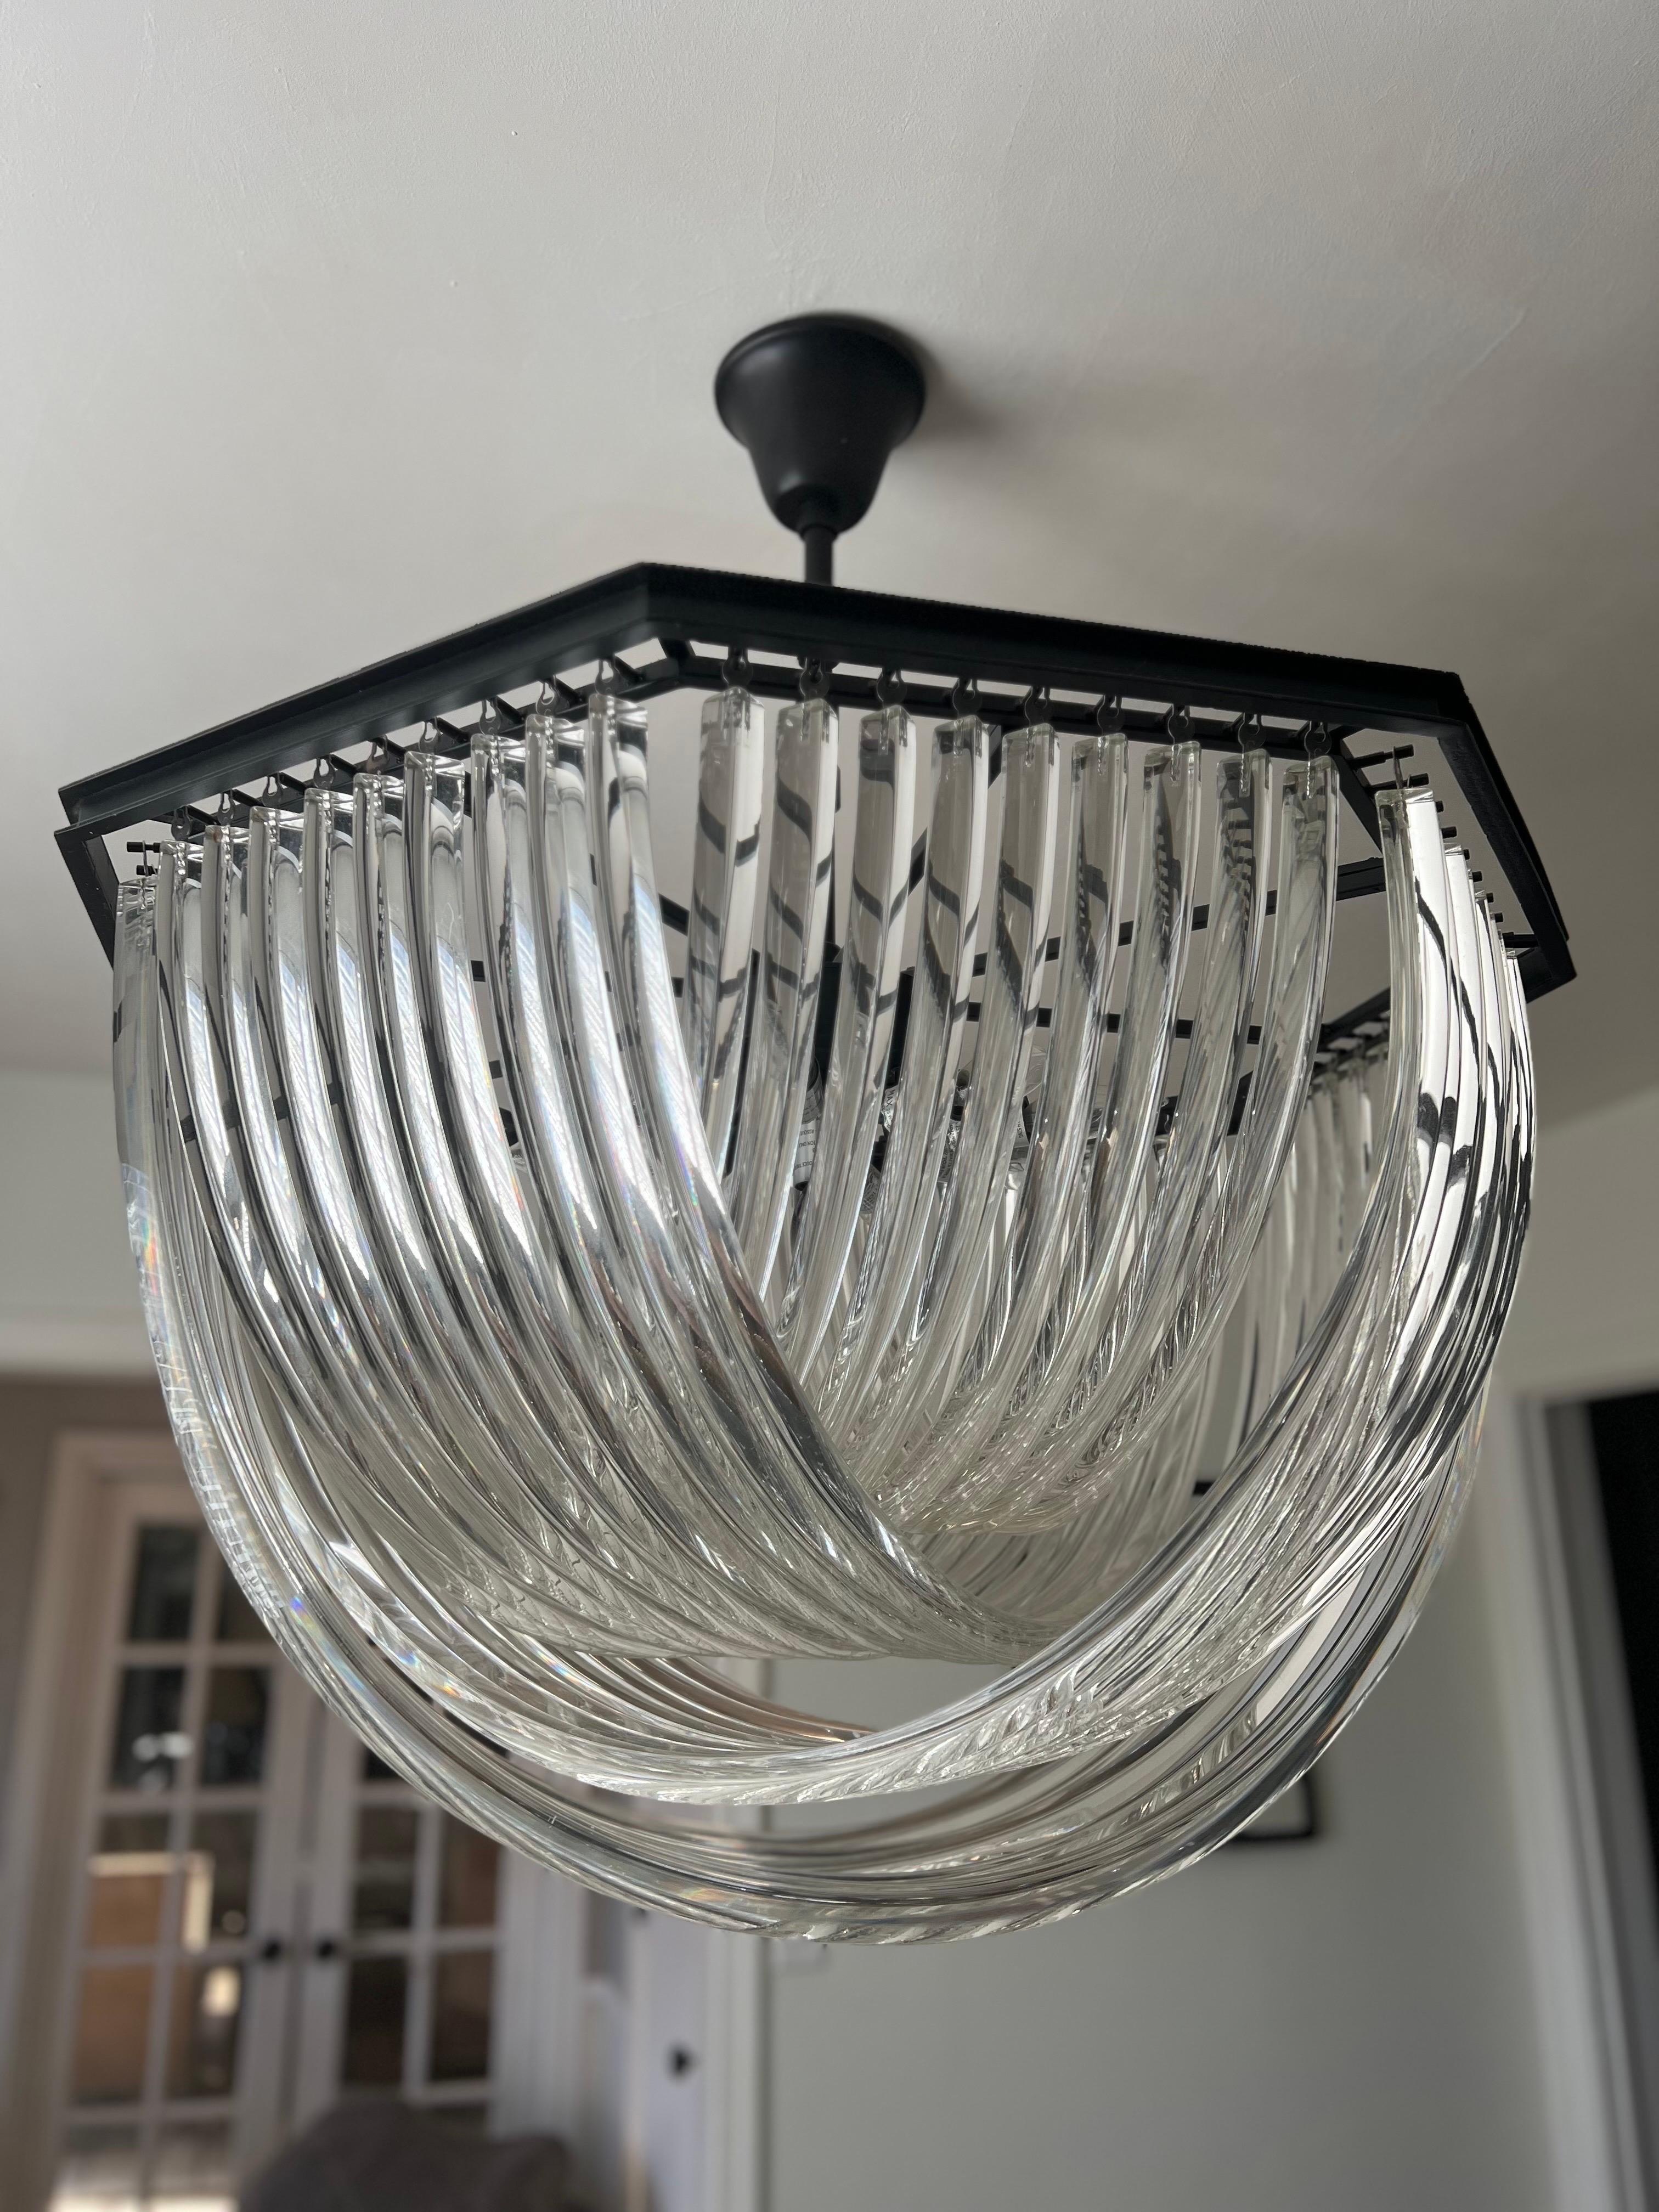 Stunning Mid Century Modern LARGE scale crossglass chandelier in the Italian inspired style of Triedri Venini.  Vintage discontinued for Restoration Hardware.

Each curved crystal rod is artfully shaped to create and overlapped effect.  Casting